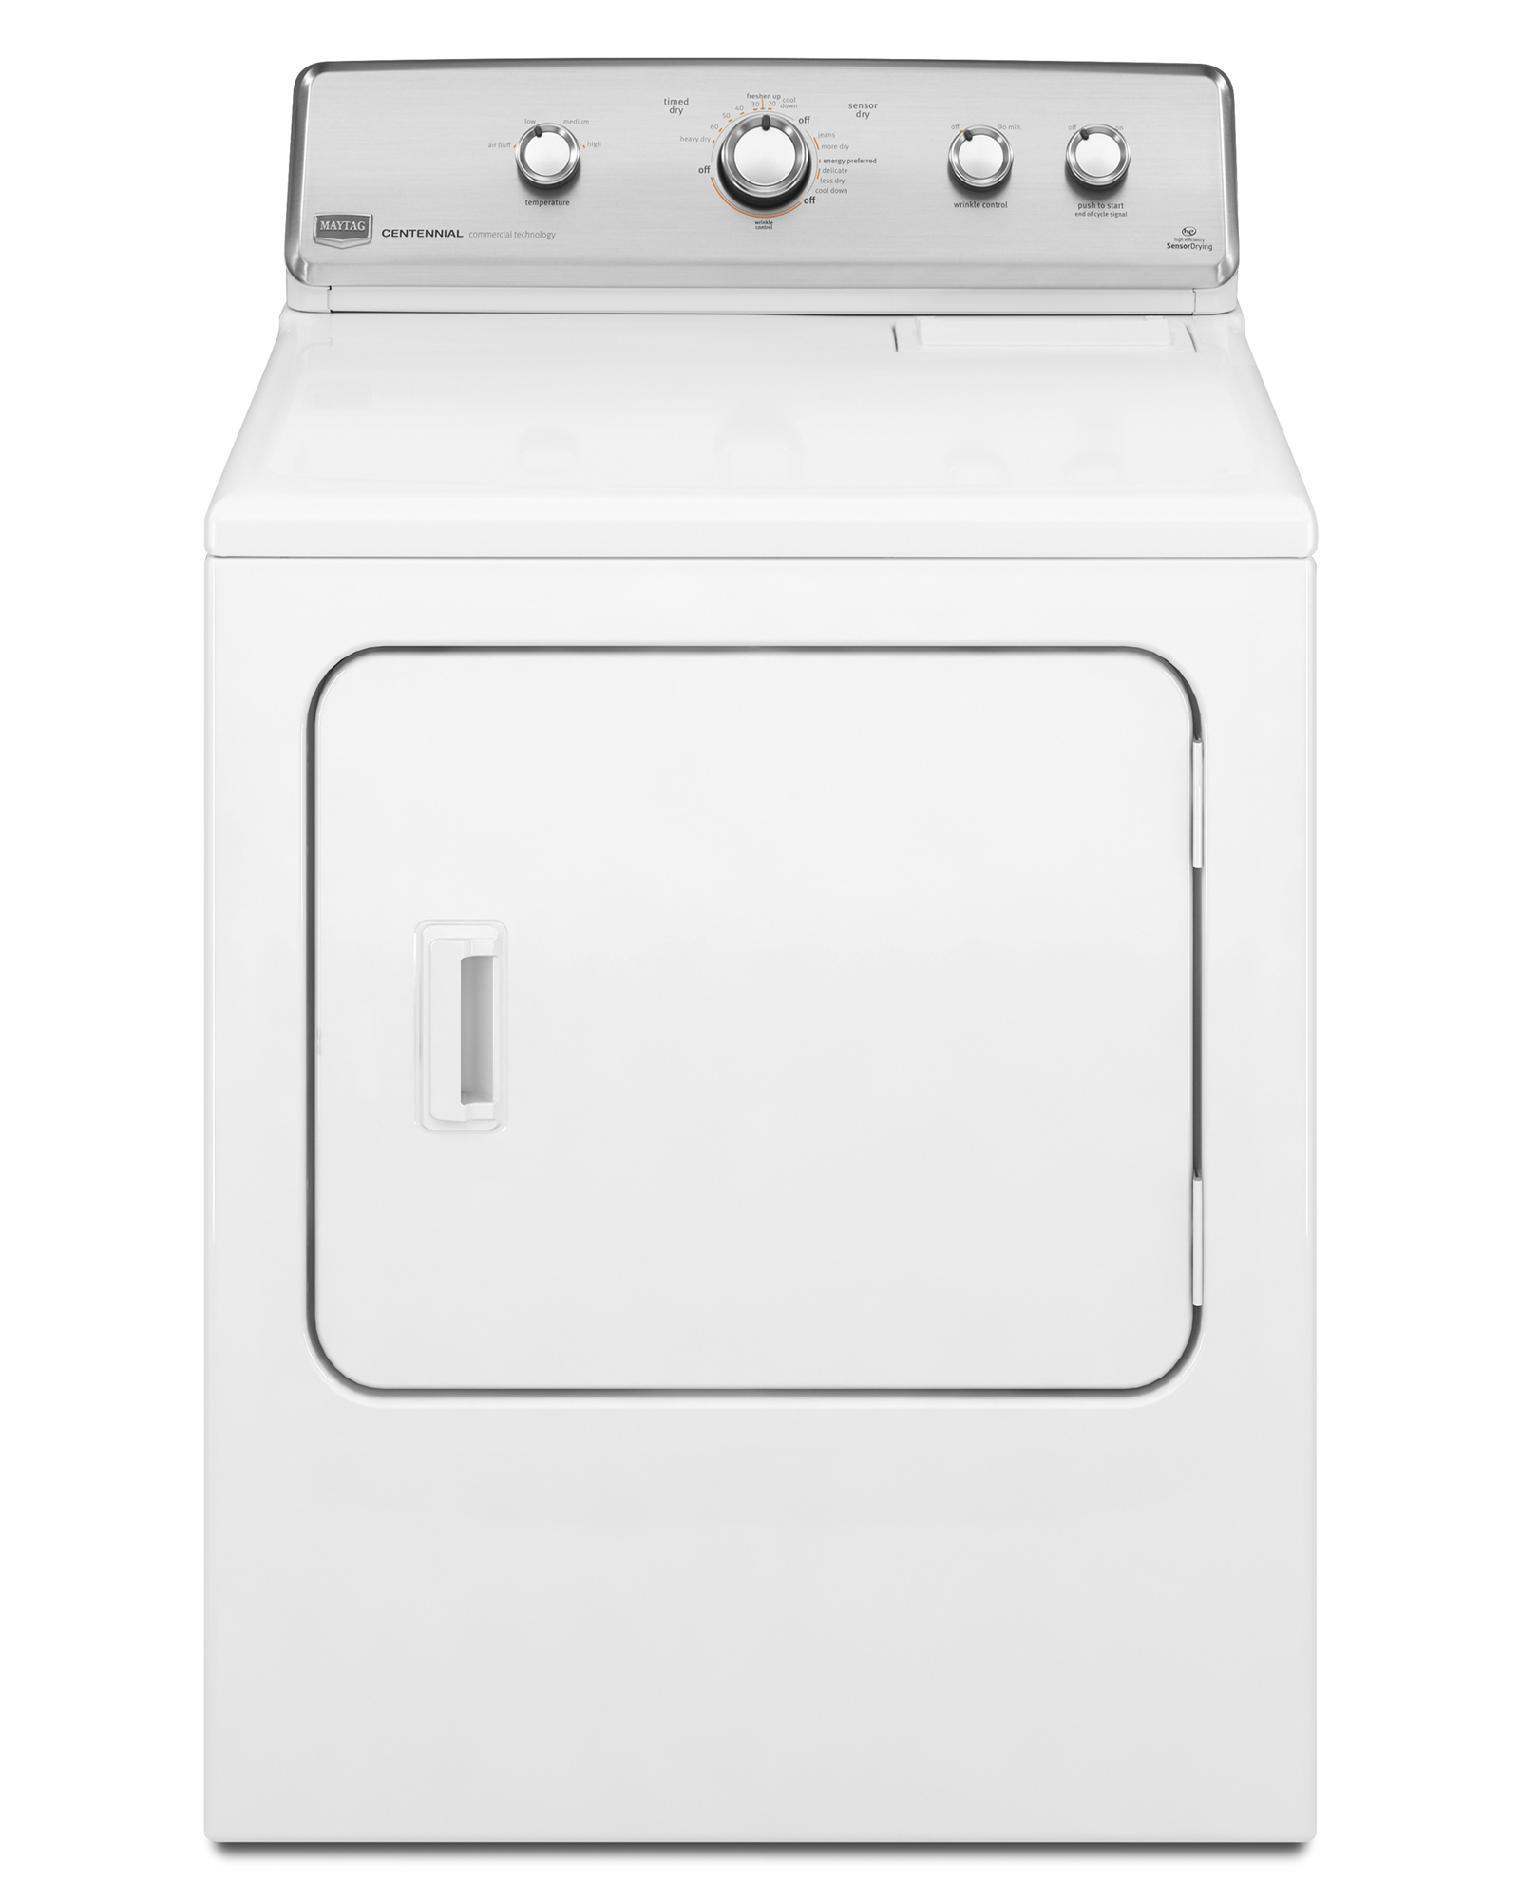 Maytag 7.0 cu. ft. Centennial Electric Dryer w/ Wrinkle Control - White 7.0 cu. ft. and greater